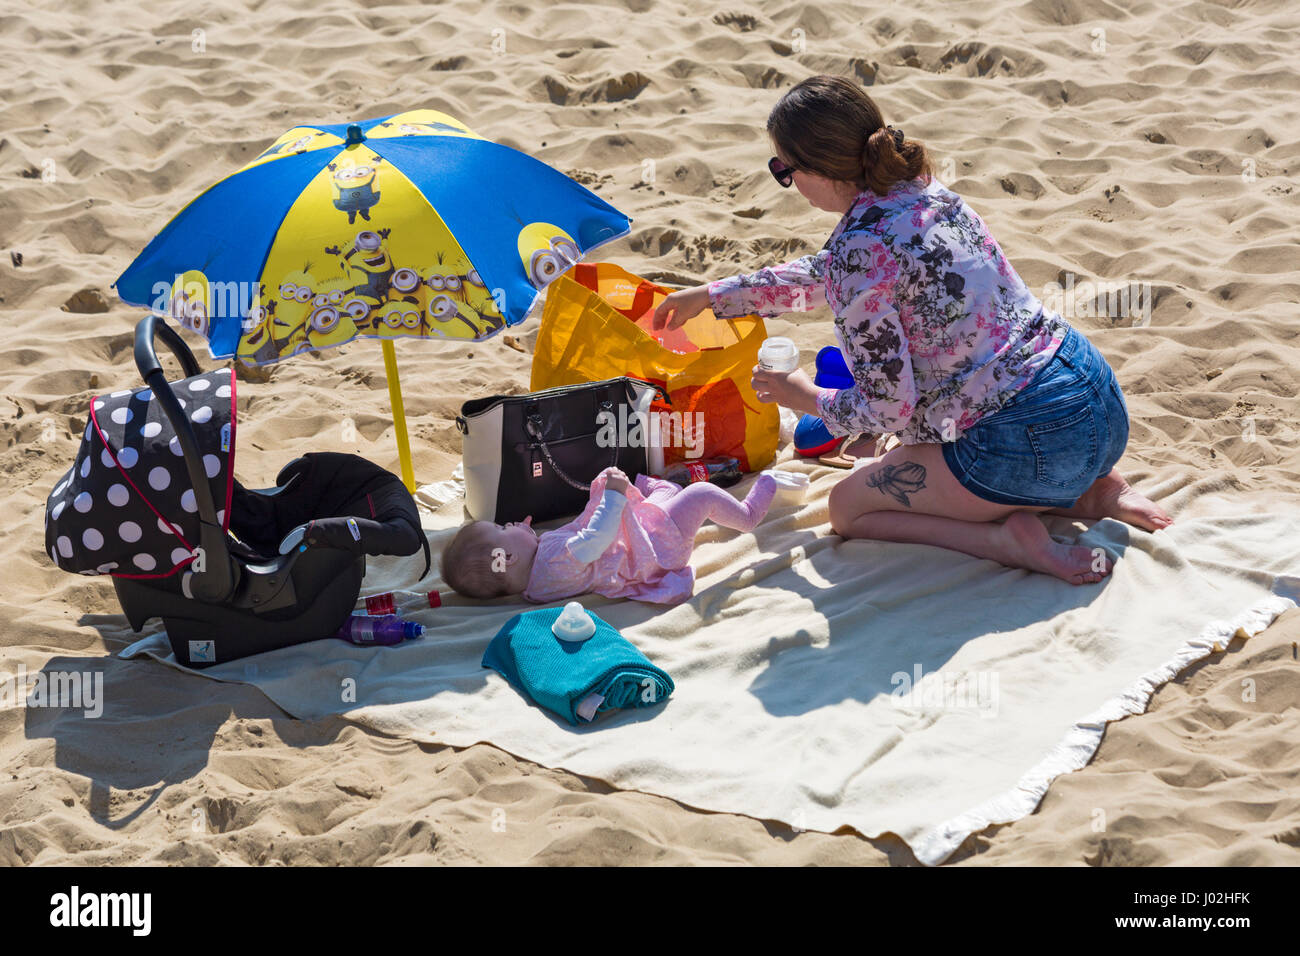 Bournemouth, Dorset, UK. 9th Apr, 2017. UK weather: lovely warm sunny day as visitors head to the seaside to make the most of the sunshine at Bournemouth beaches. Woman preparing food drink for baby lying on blanket at the beach.  Credit: Carolyn Jenkins/Alamy Live News Stock Photo